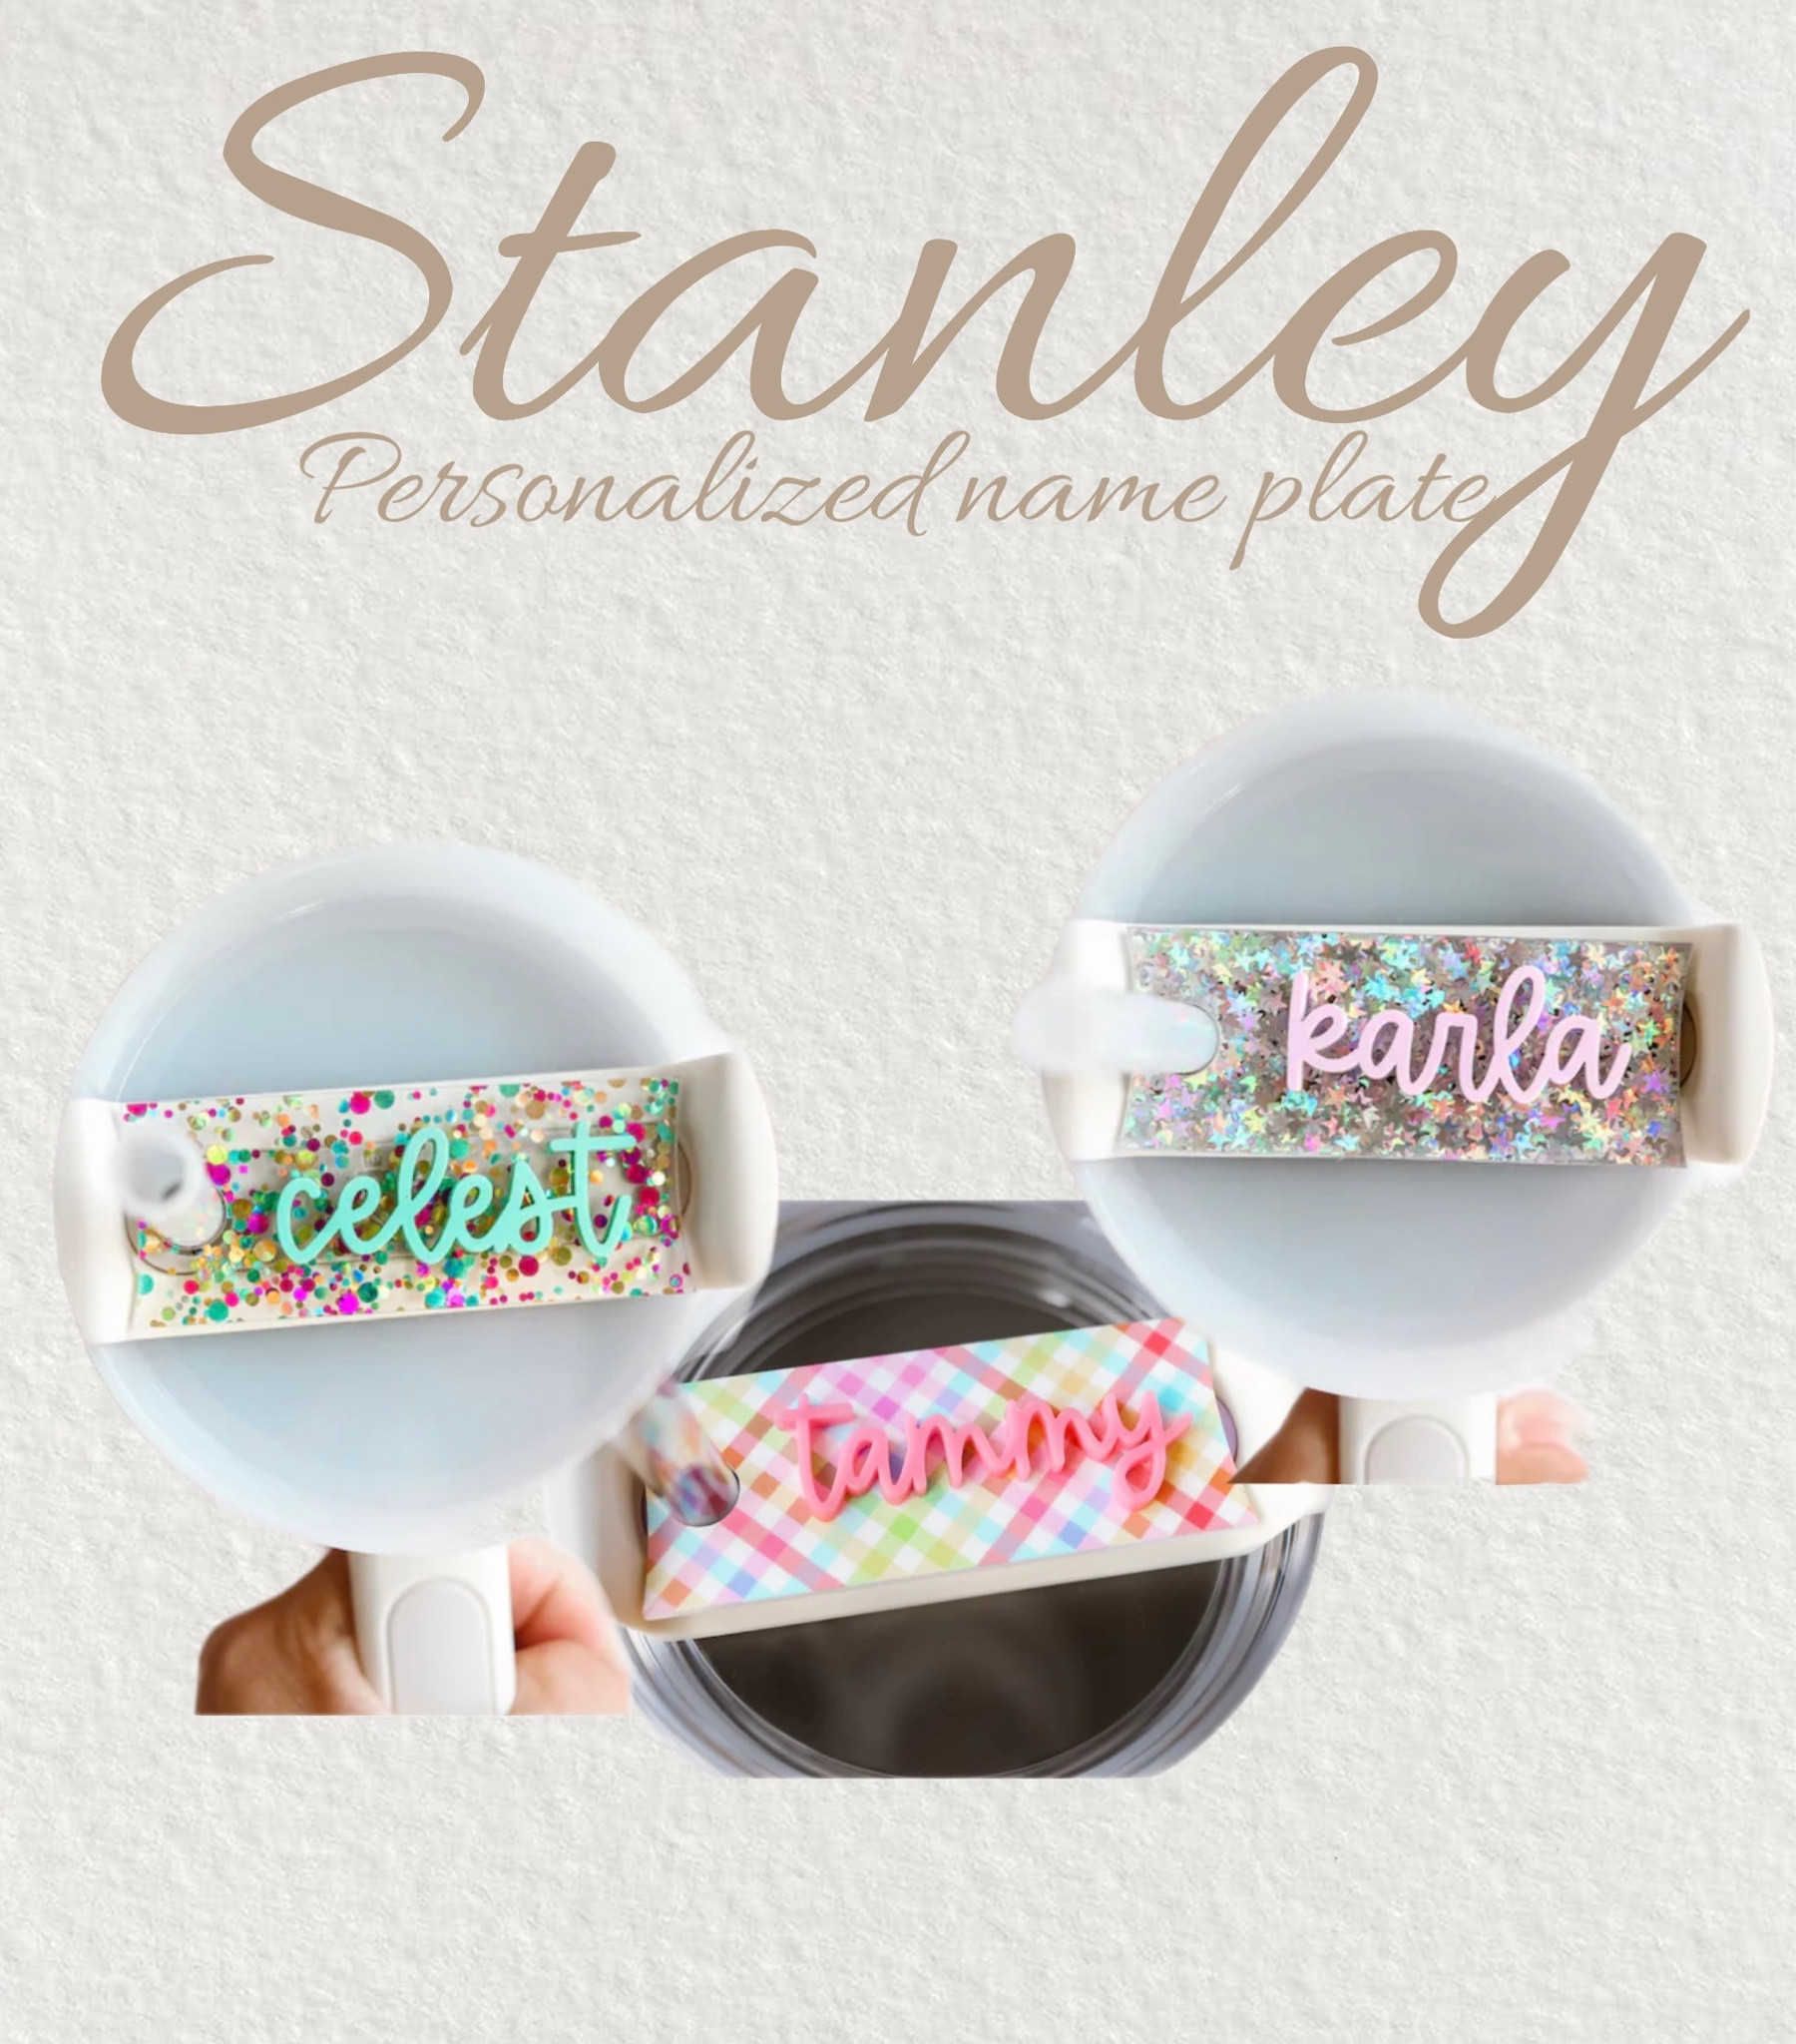 Stanley 40oz Personalized Name Plate